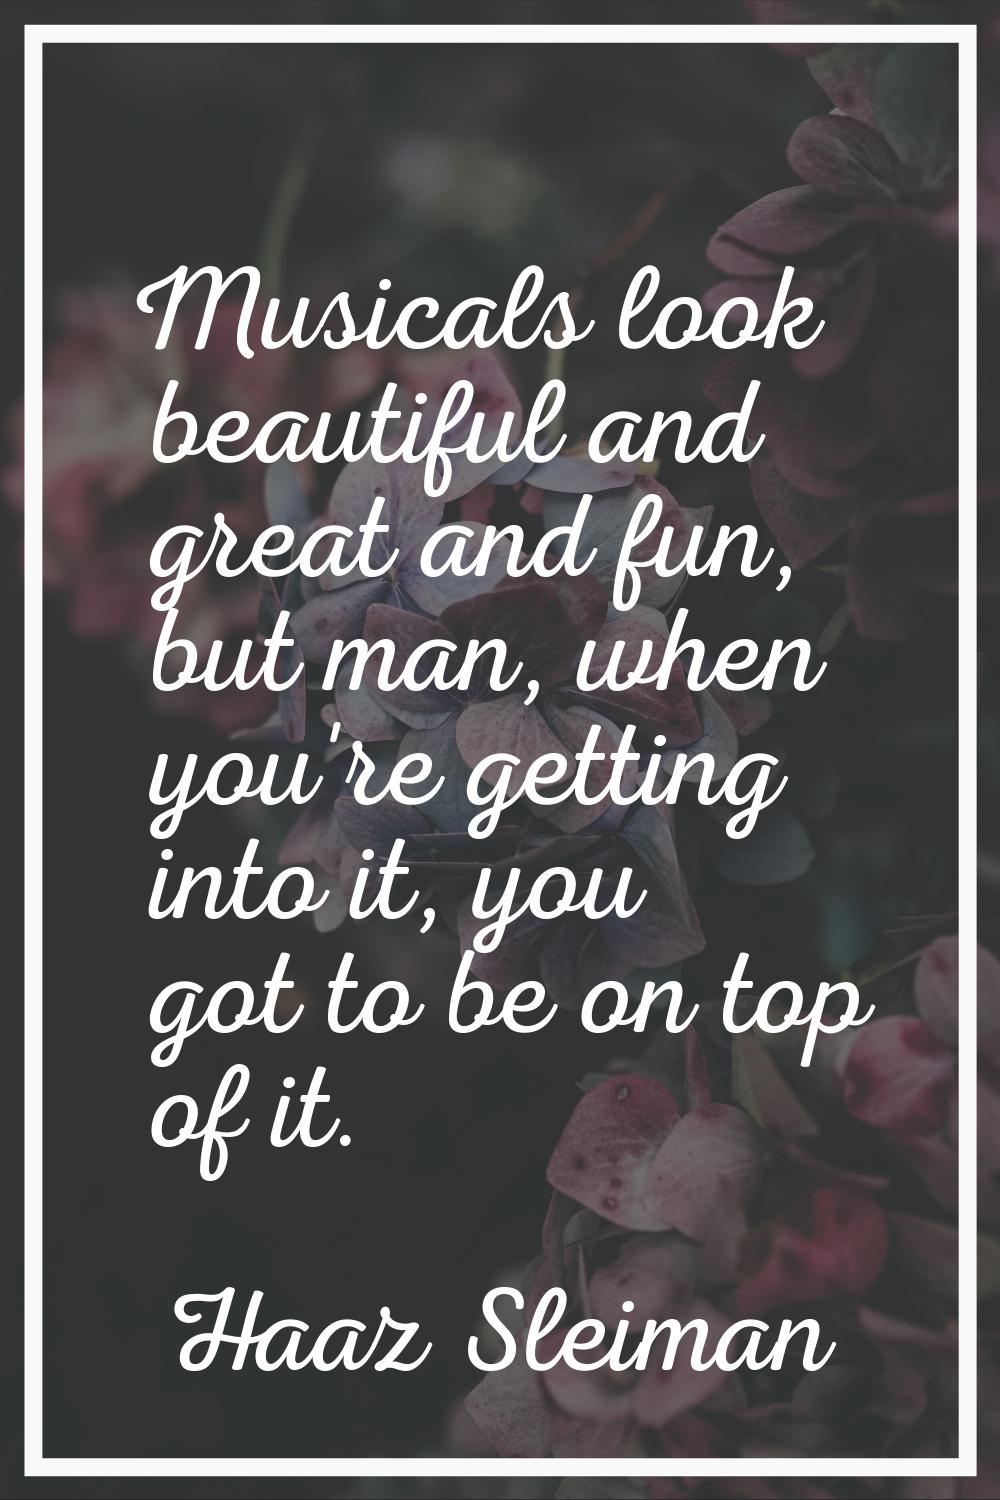 Musicals look beautiful and great and fun, but man, when you're getting into it, you got to be on t